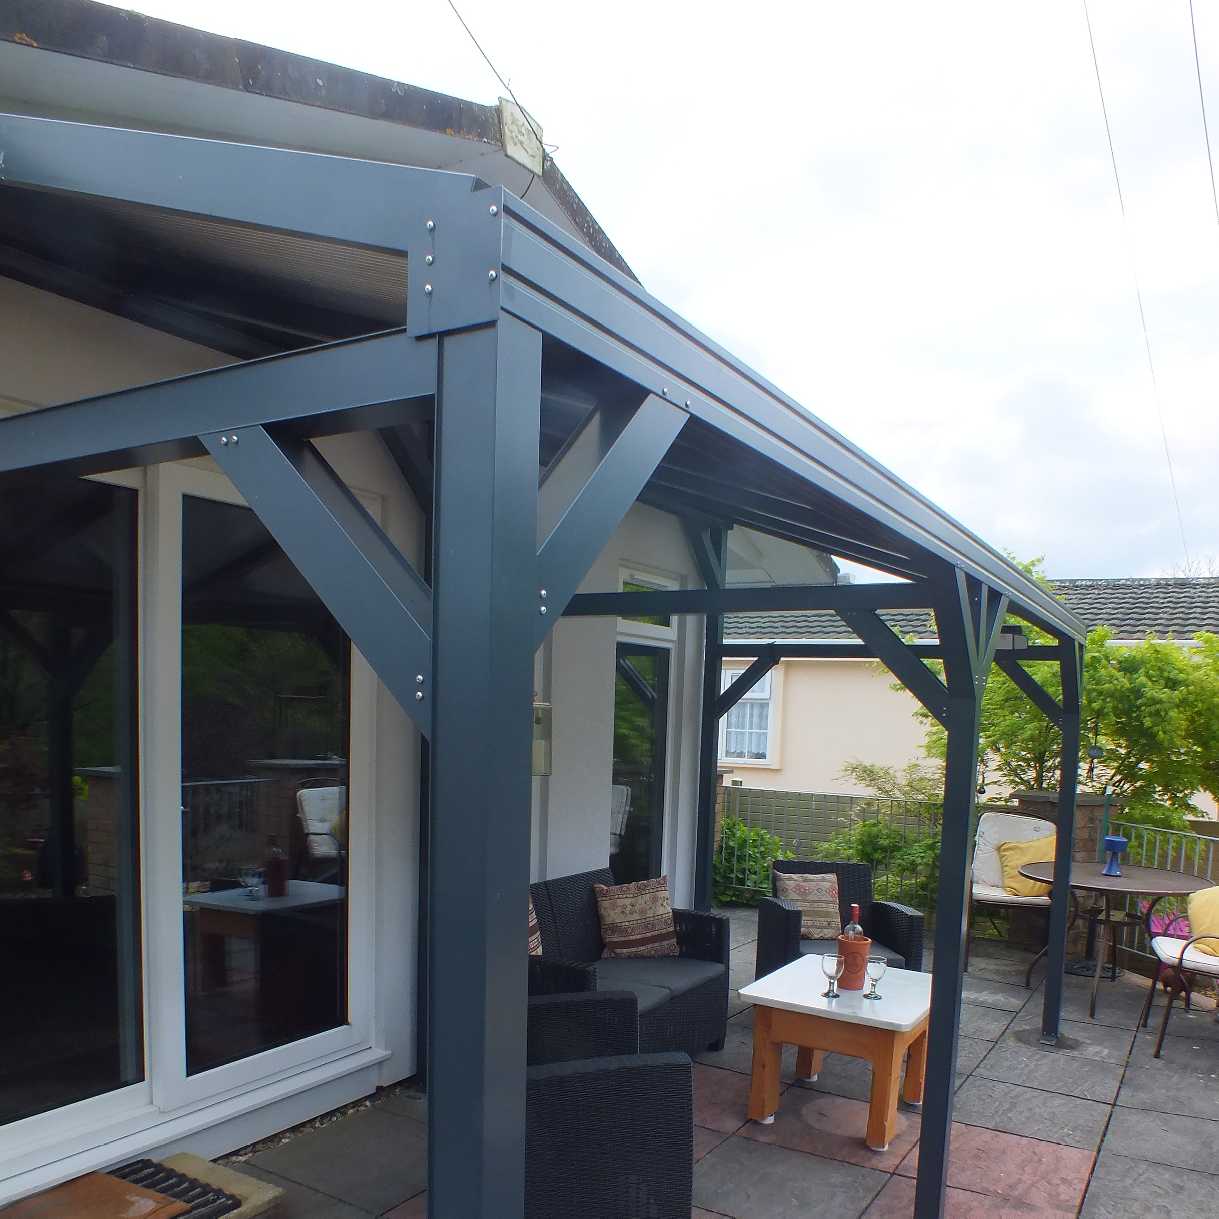 Affordable Omega Smart Free-Standing, Anthracite Grey MonoPitch Roof Canopy with 16mm Polycarbonate Glazing - 4.2m (W) x 3.5m (P), (6) Supporting Posts